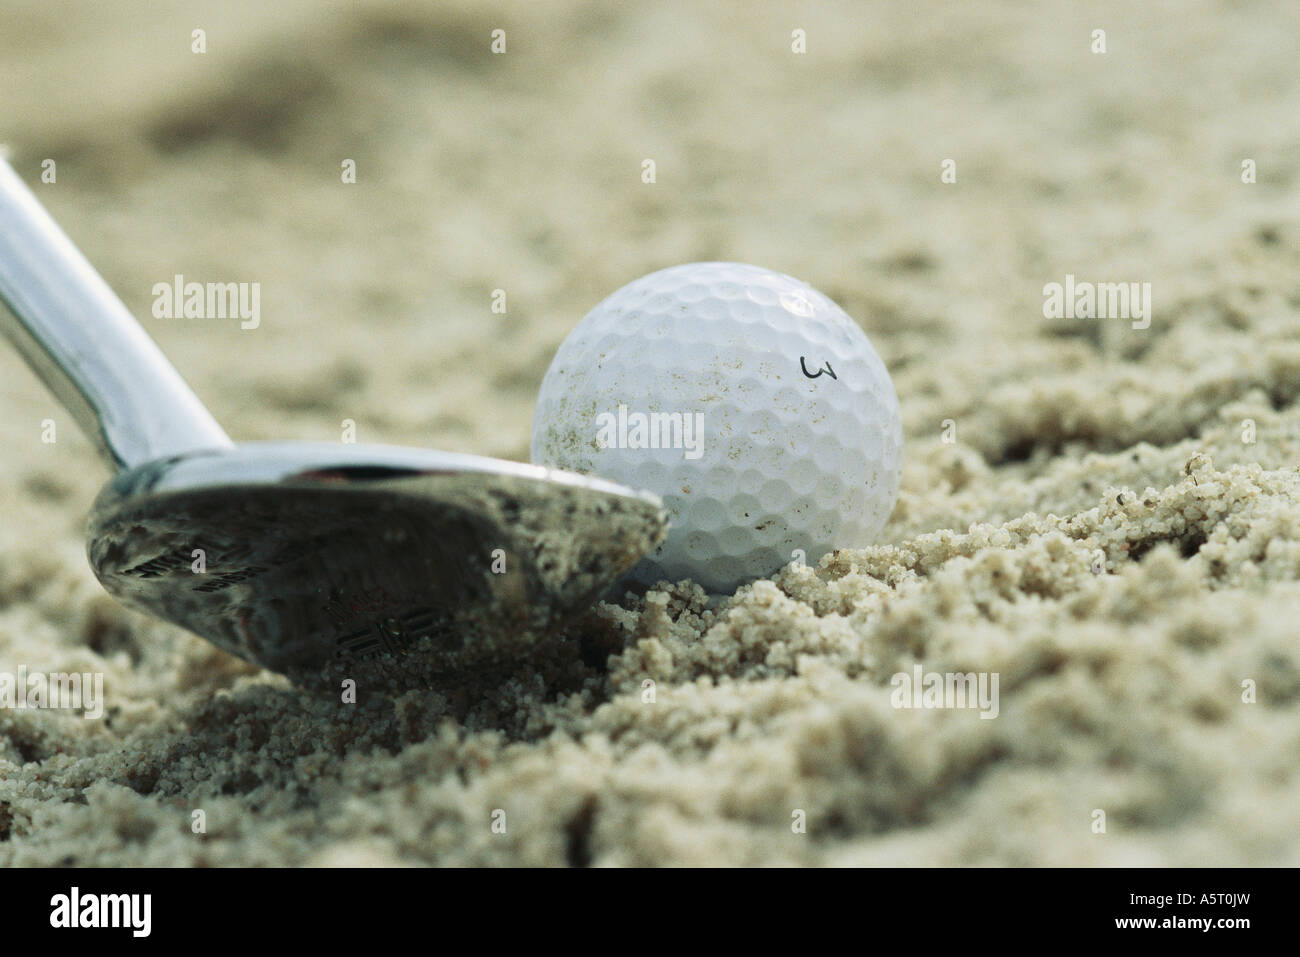 Sand wedge posed next to golf ball on sand Stock Photo